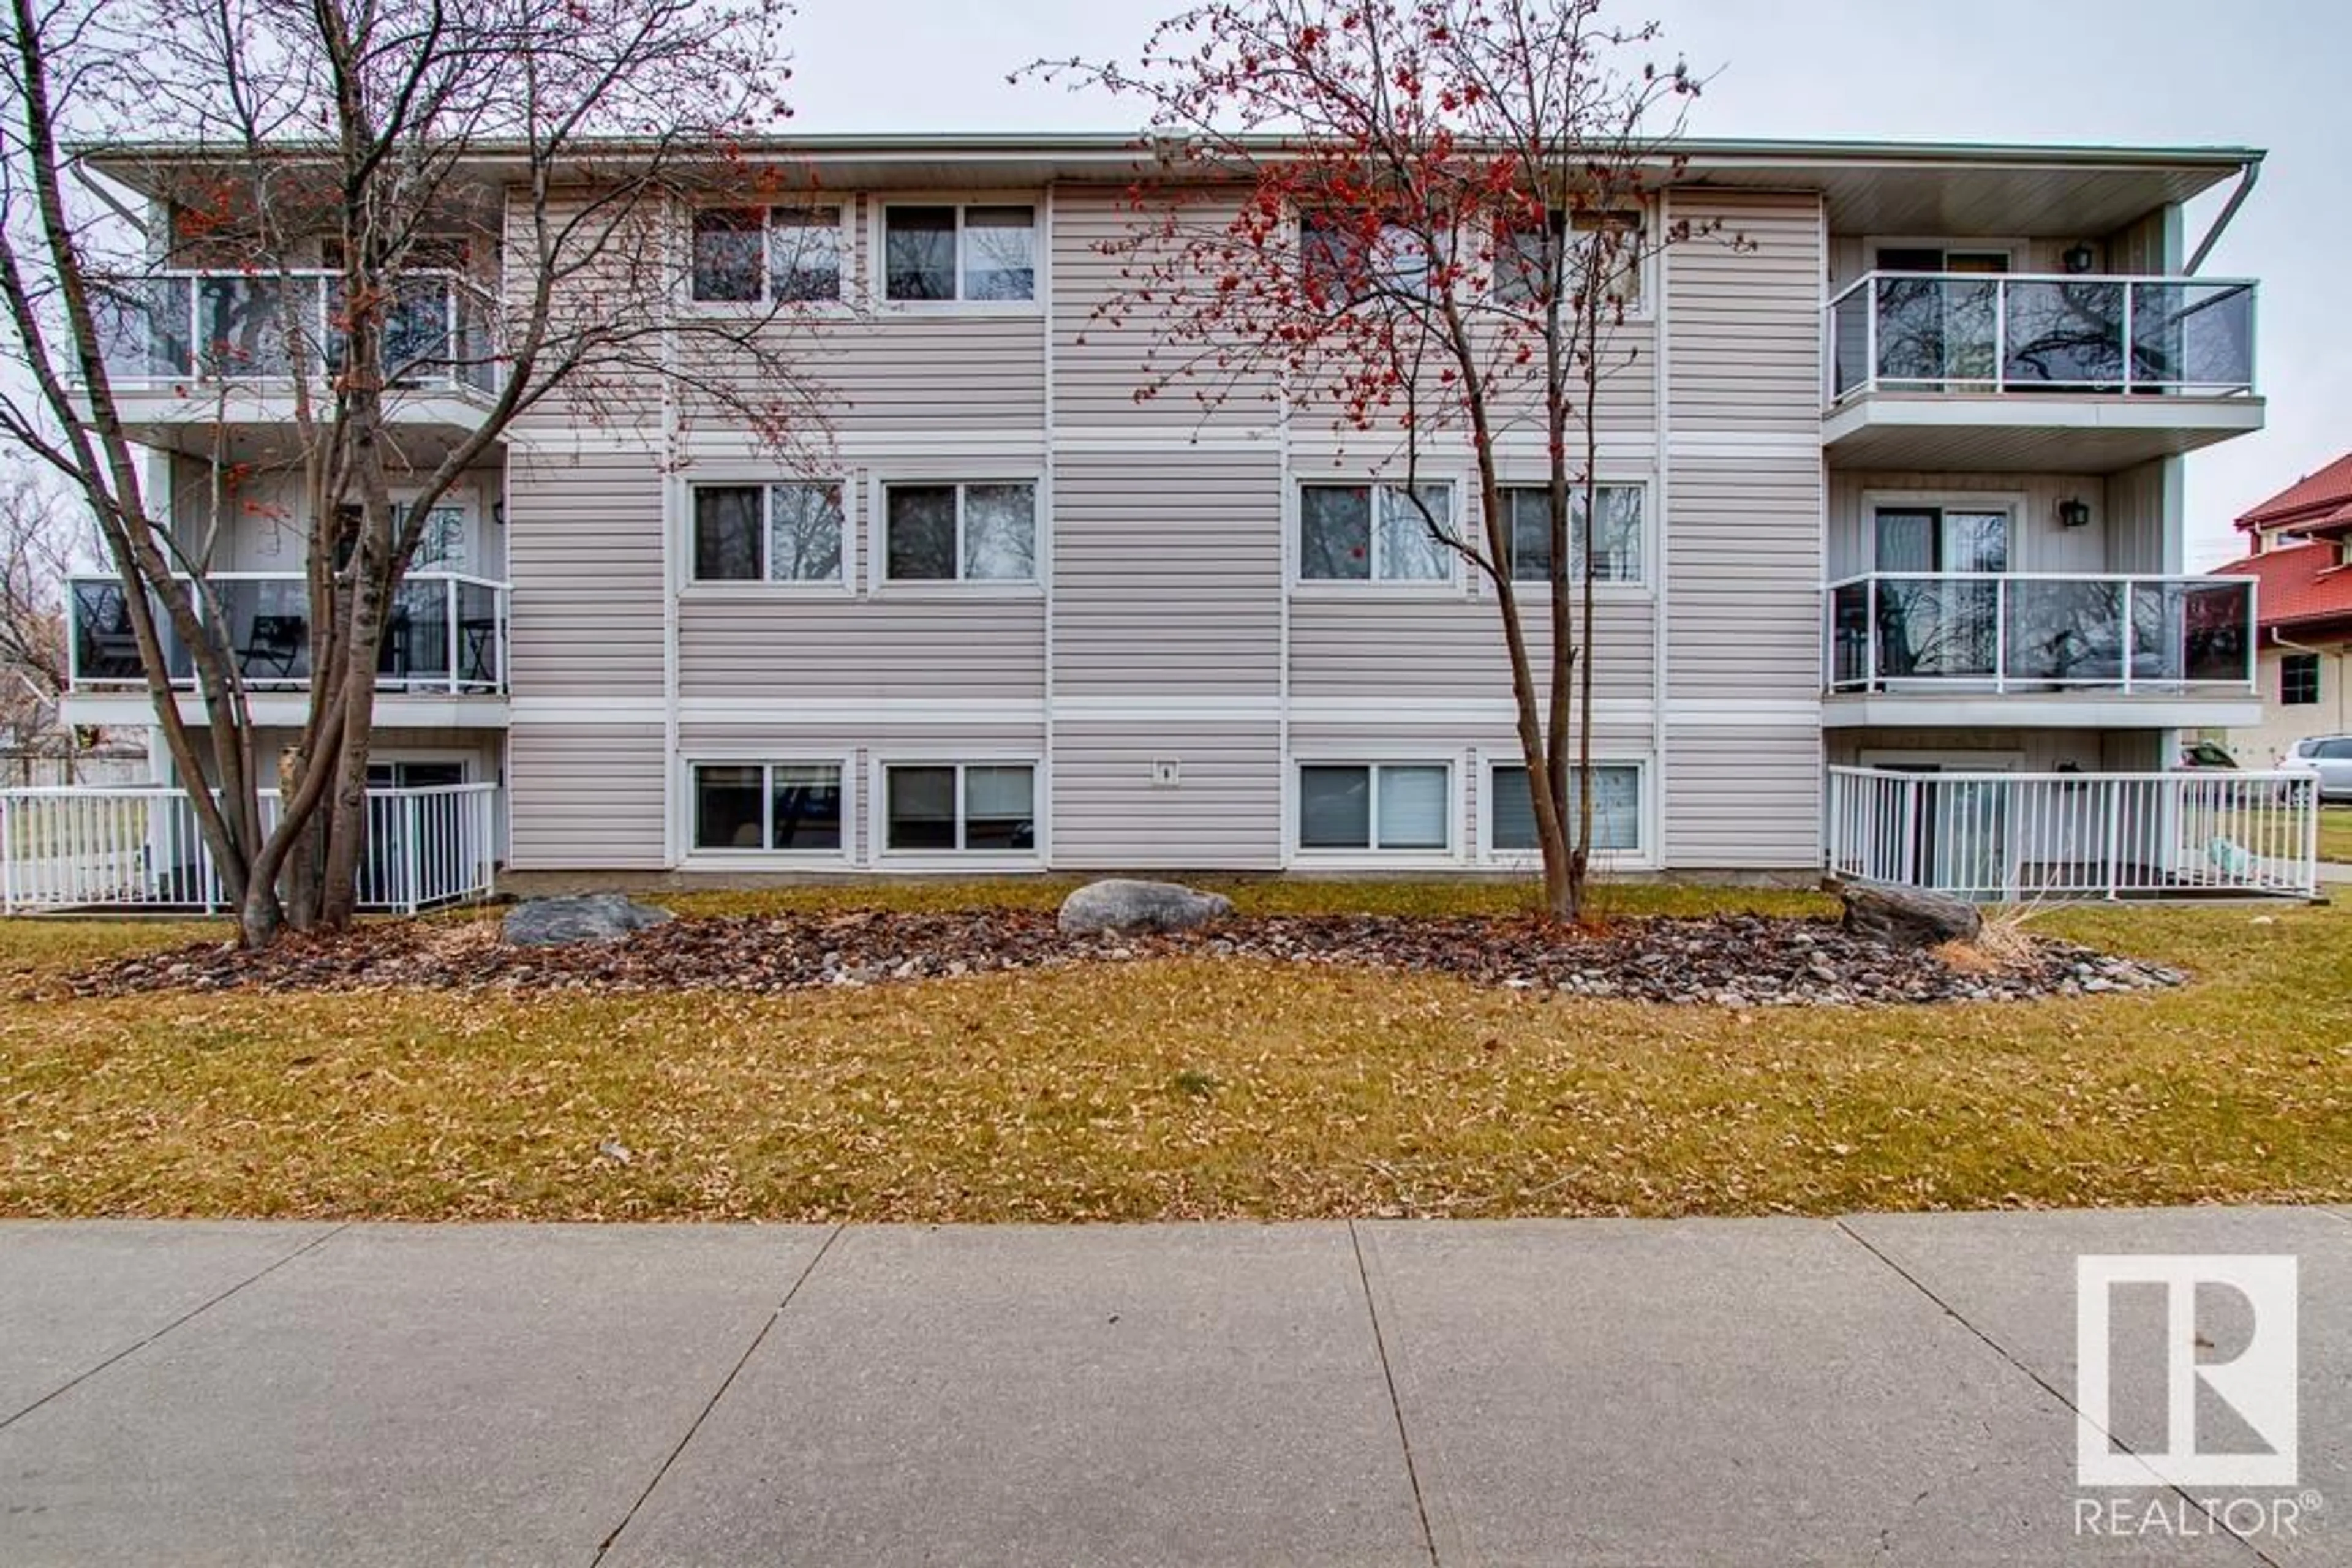 A pic from exterior of the house or condo for #204 11324 97 ST NW, Edmonton Alberta T5G1X4